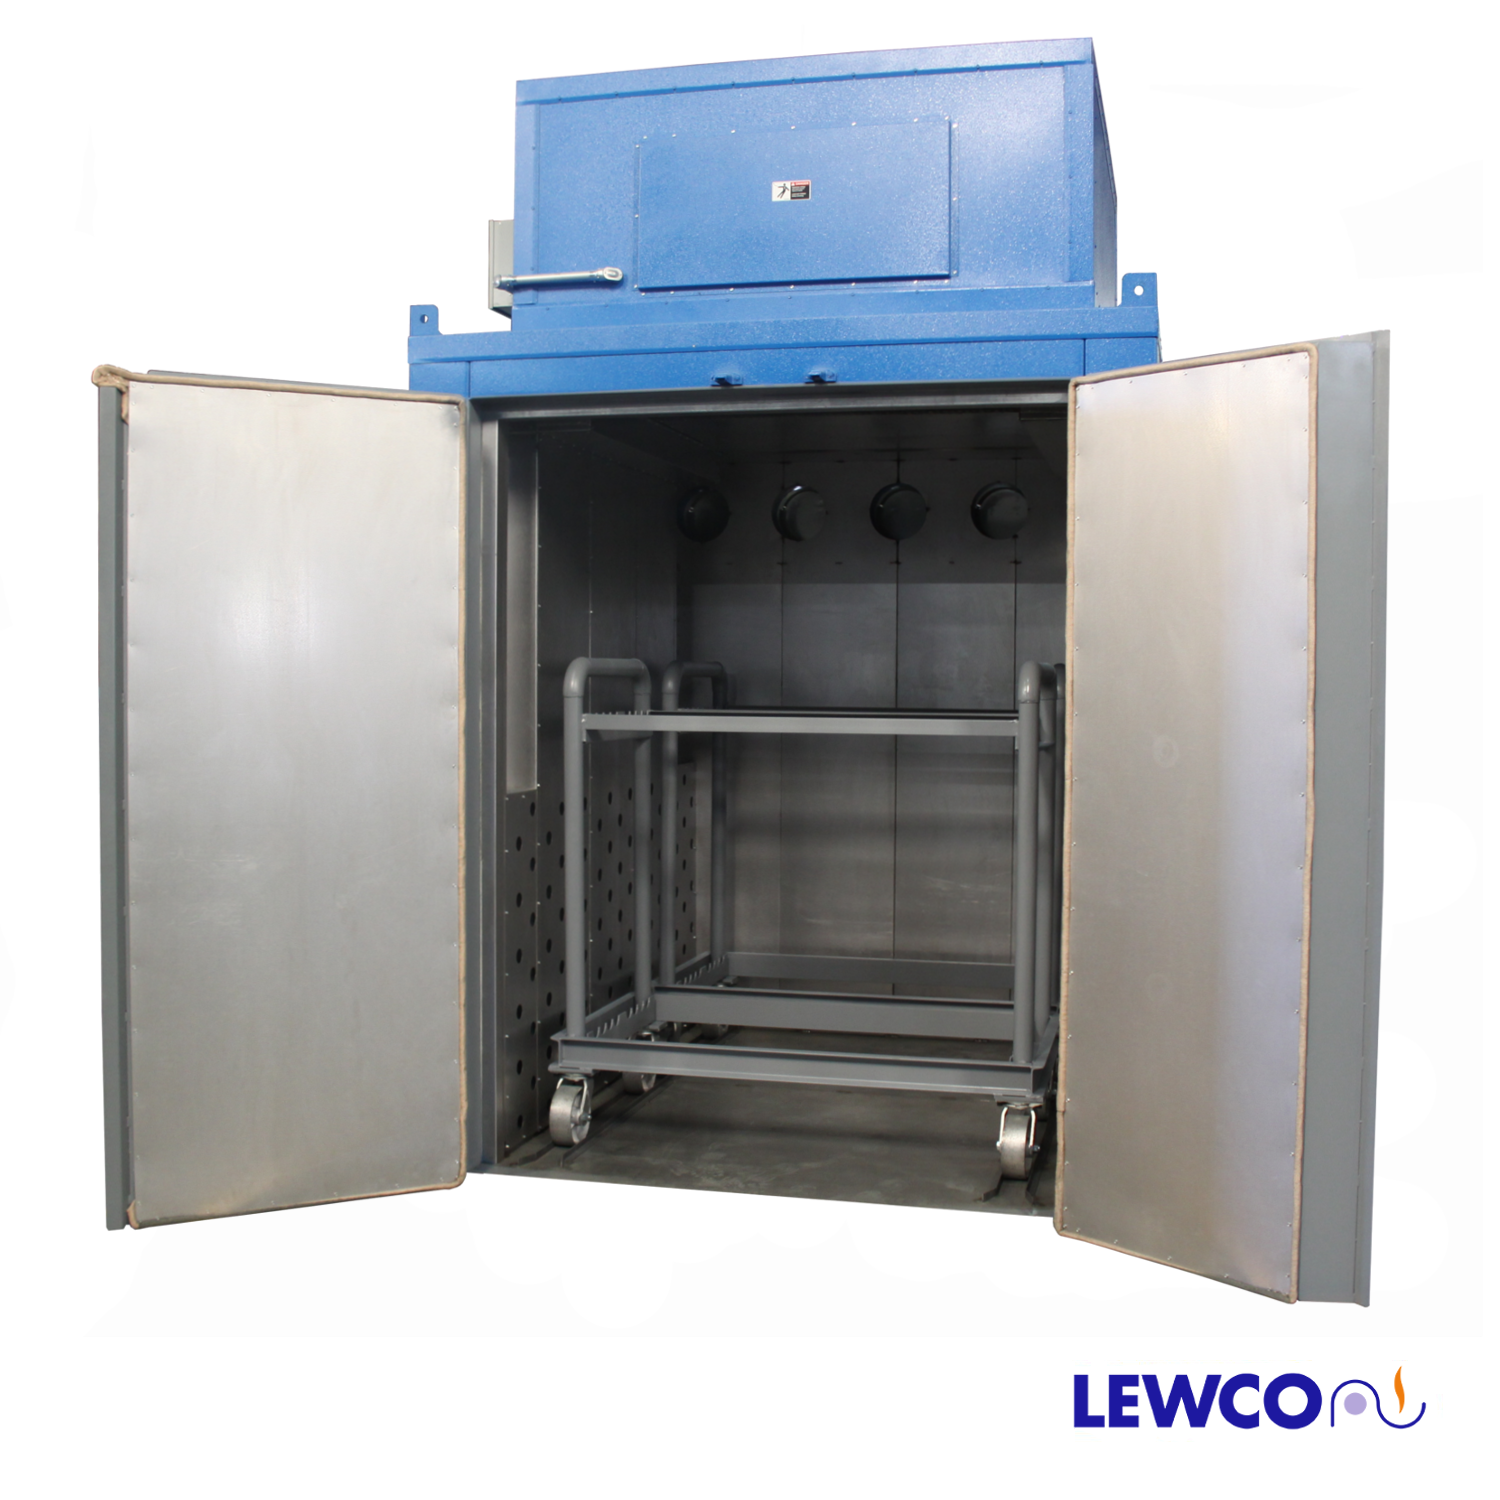 industrial ovens manufacturers